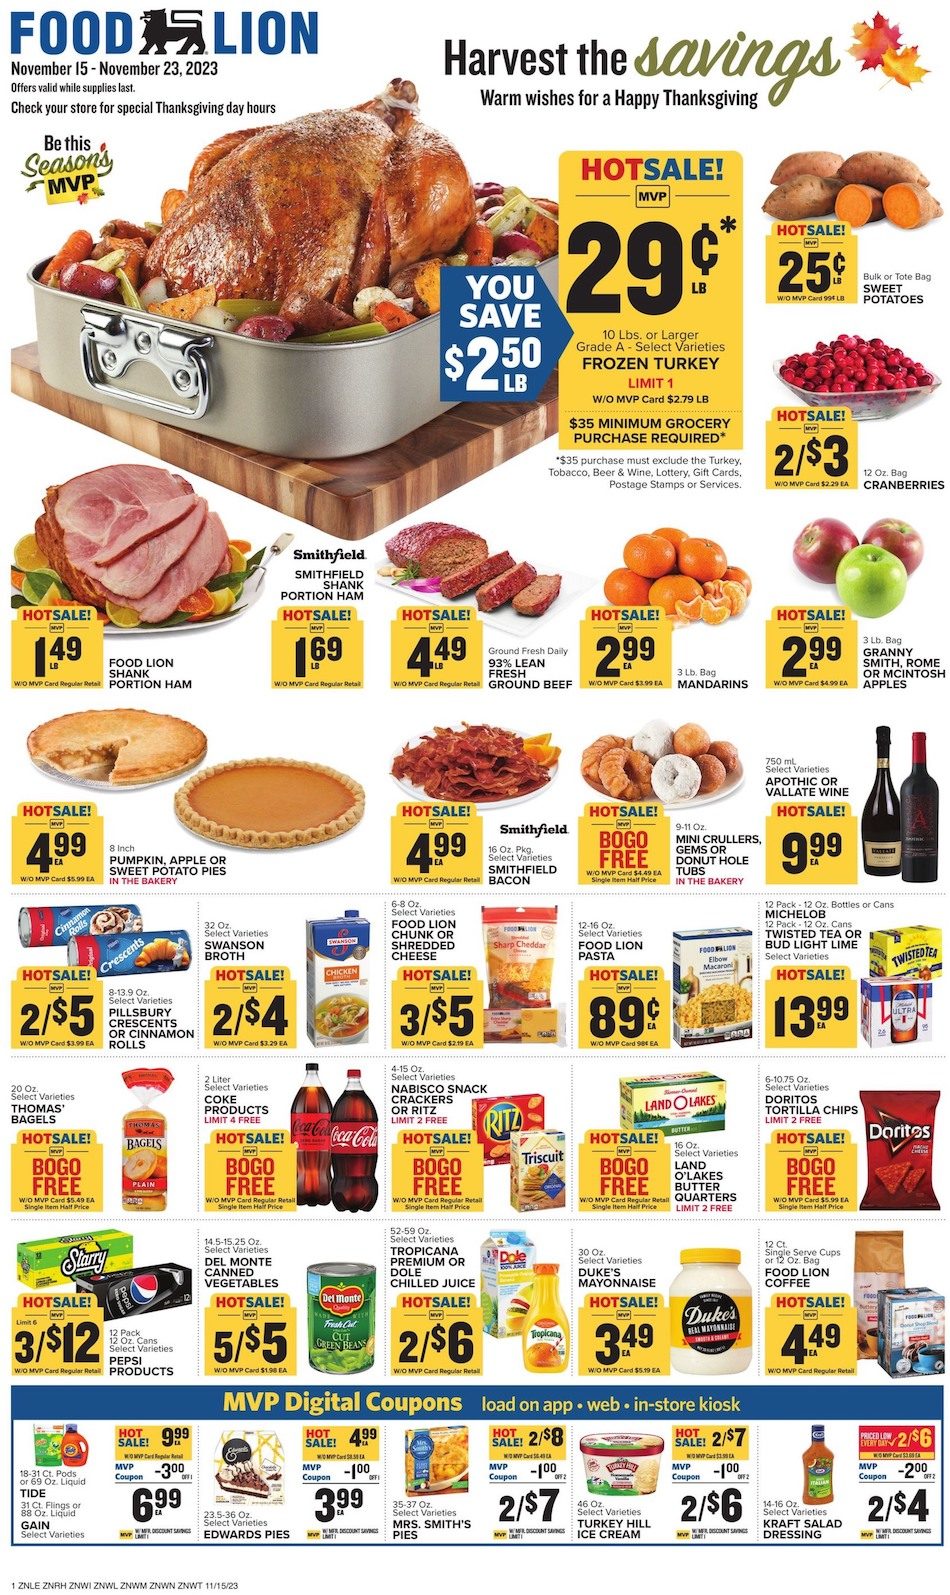 Food Lion Weekly Ad 15th – 21st November 2023 Page 1